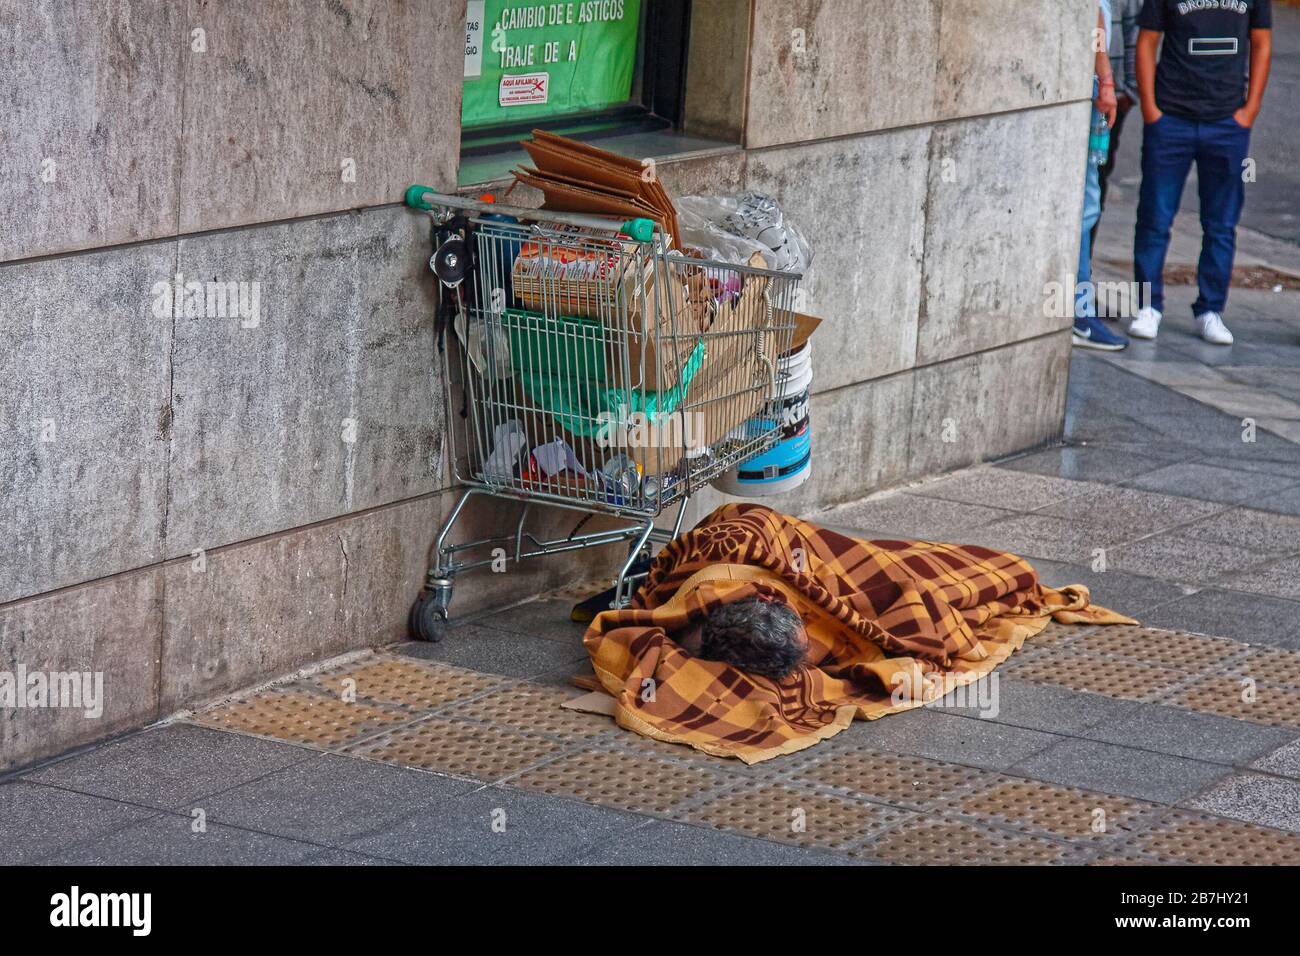 homeless person; poverty; shopping cart; possessions, sleeping; street corner; blanket; South America; Buenos Aires; Argentina; summer Stock Photo